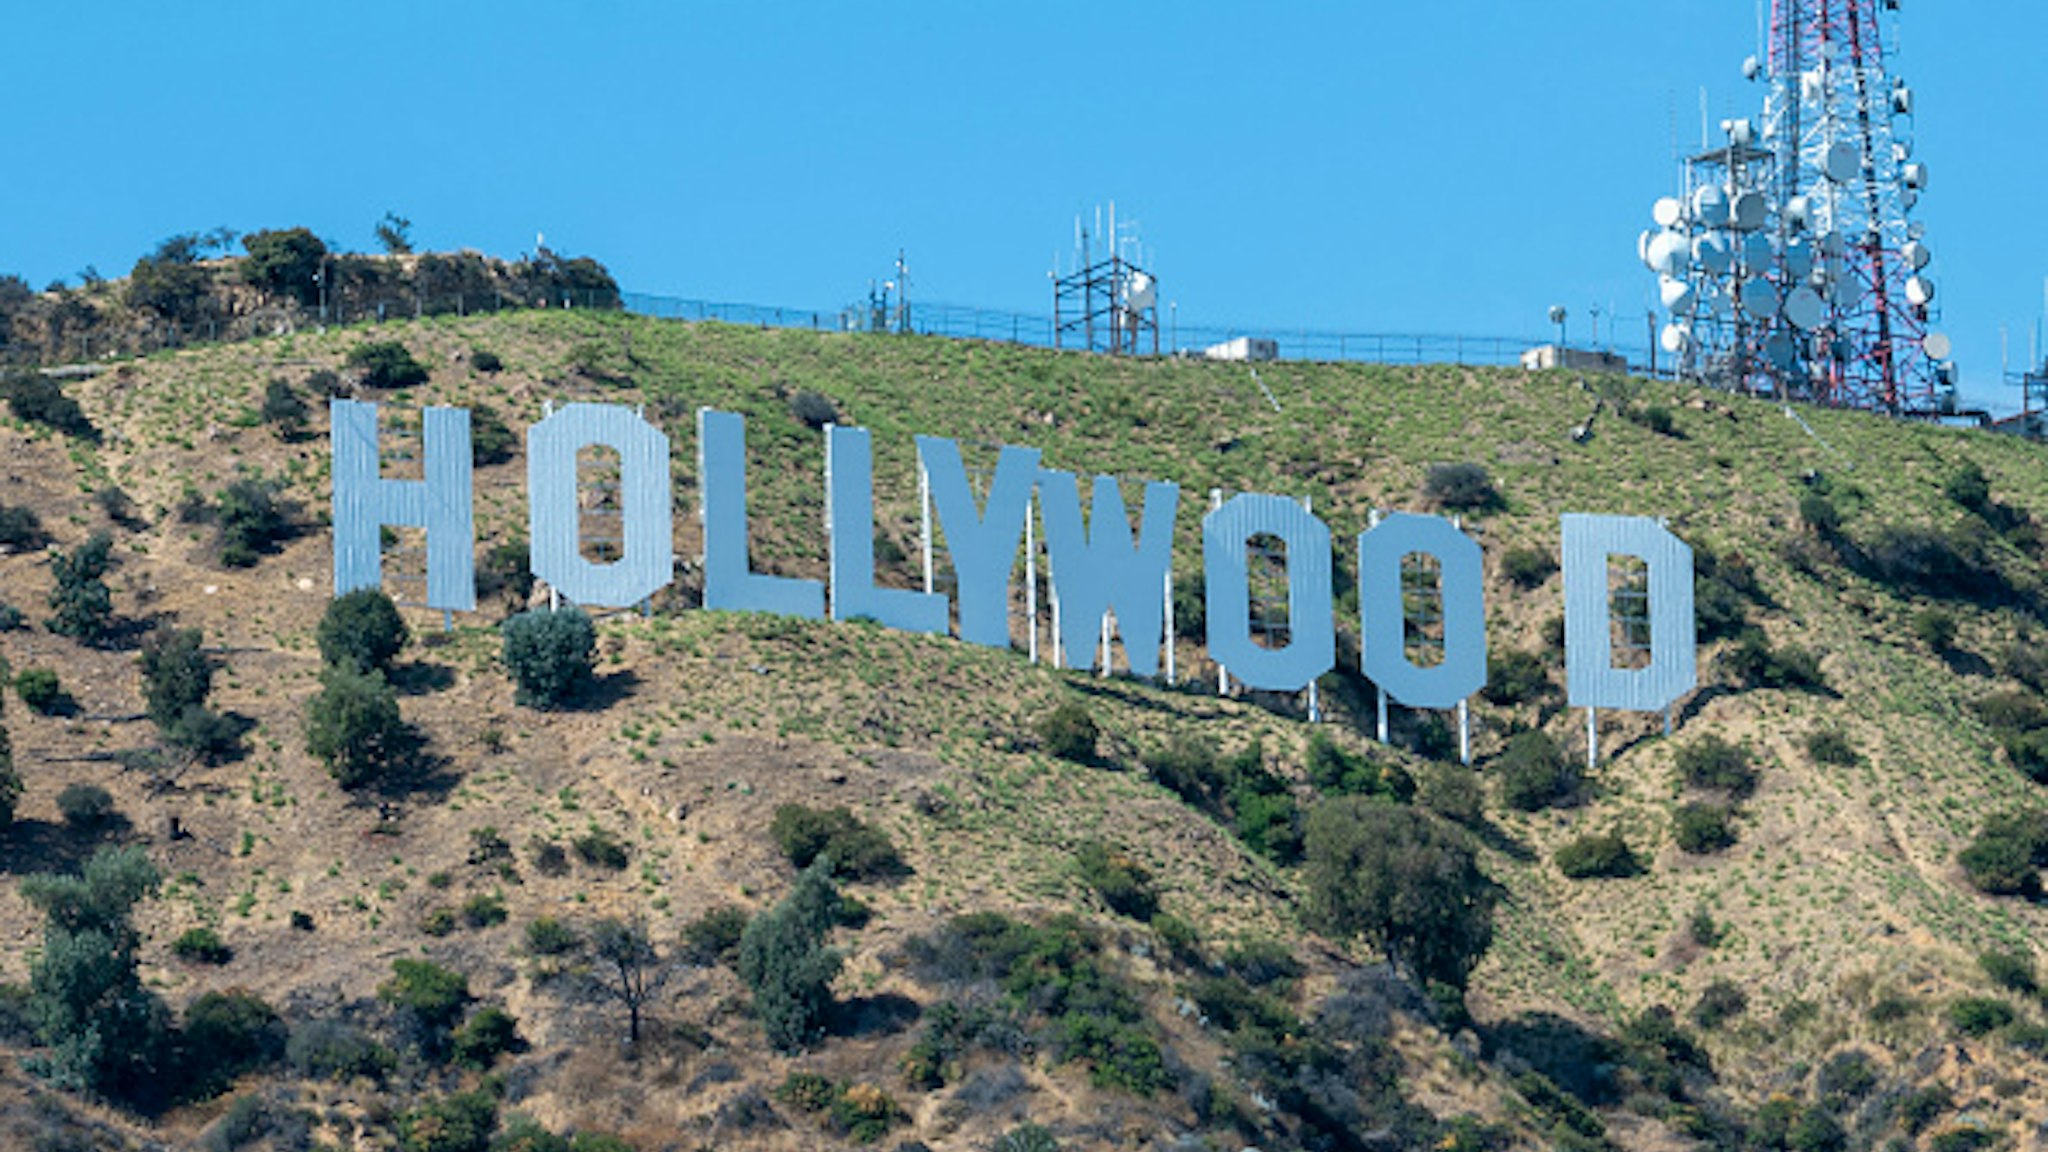 LOS ANGELES, CA - JULY 11: The Hollywood Sign is seen on July 11, 2020 in Los Angeles, California.